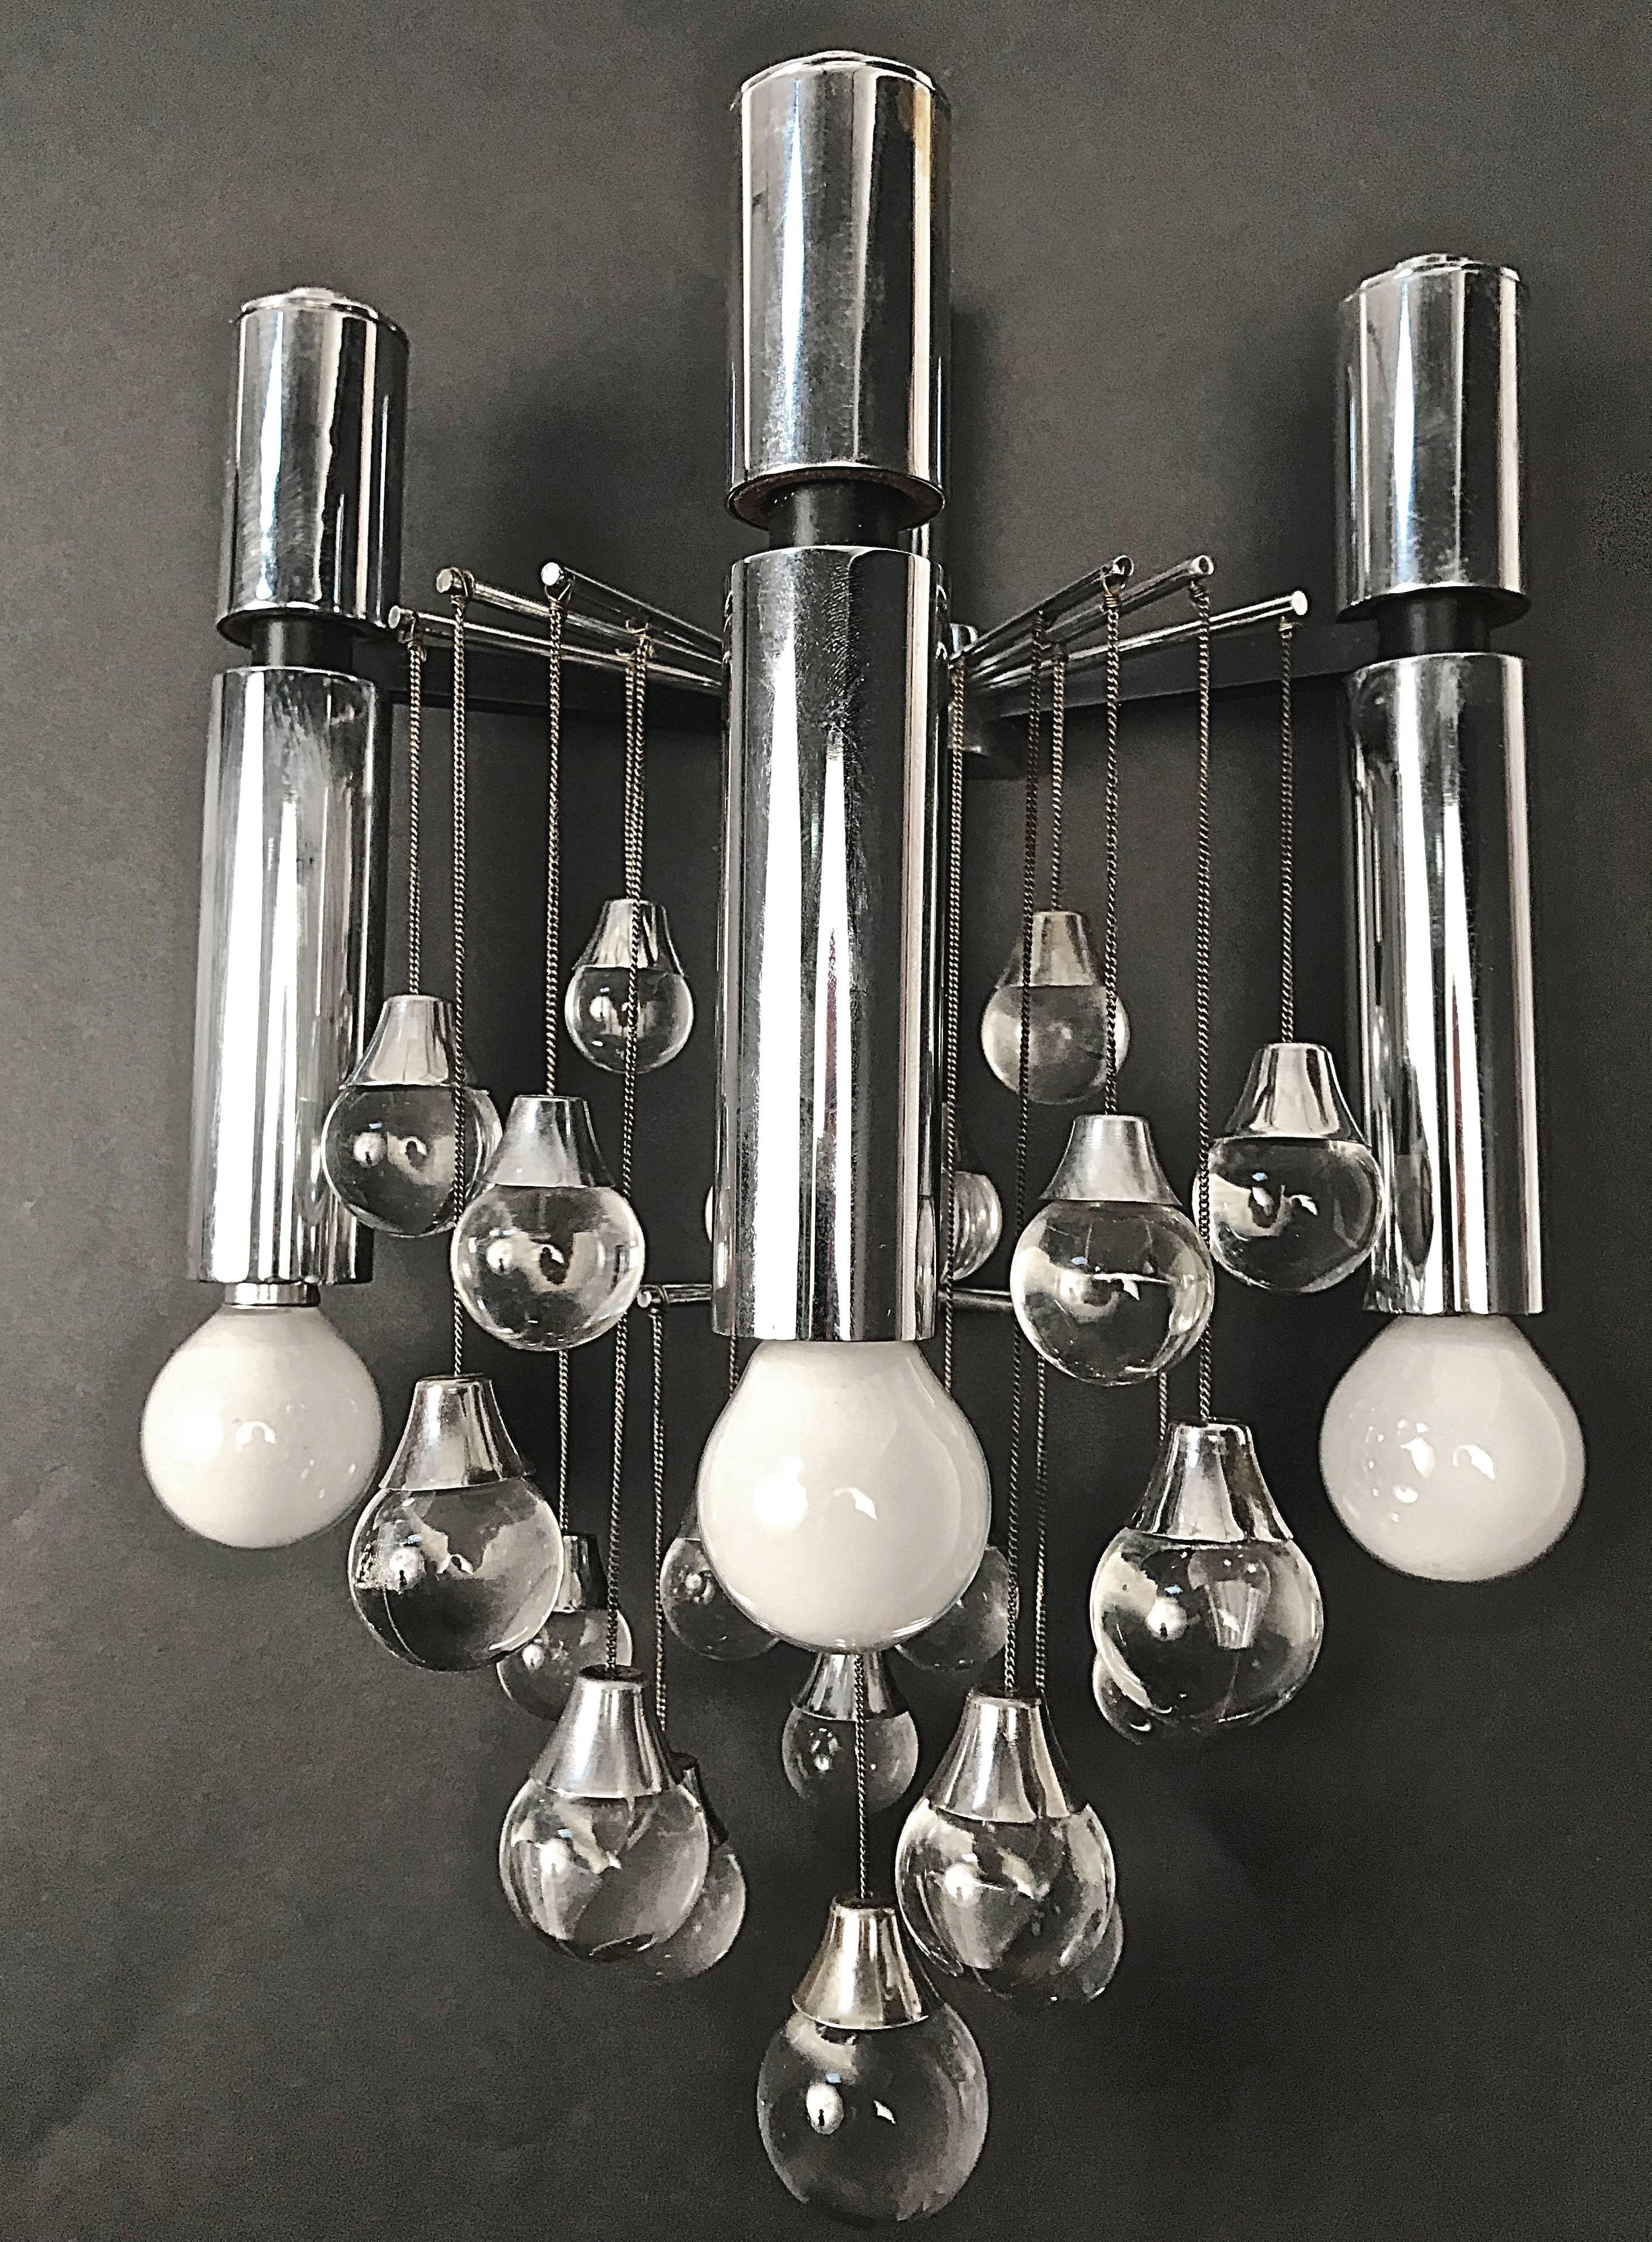 Pair of Sciolari Chrome and Glass Italian Sconces with Three Lights, 1960s For Sale 12